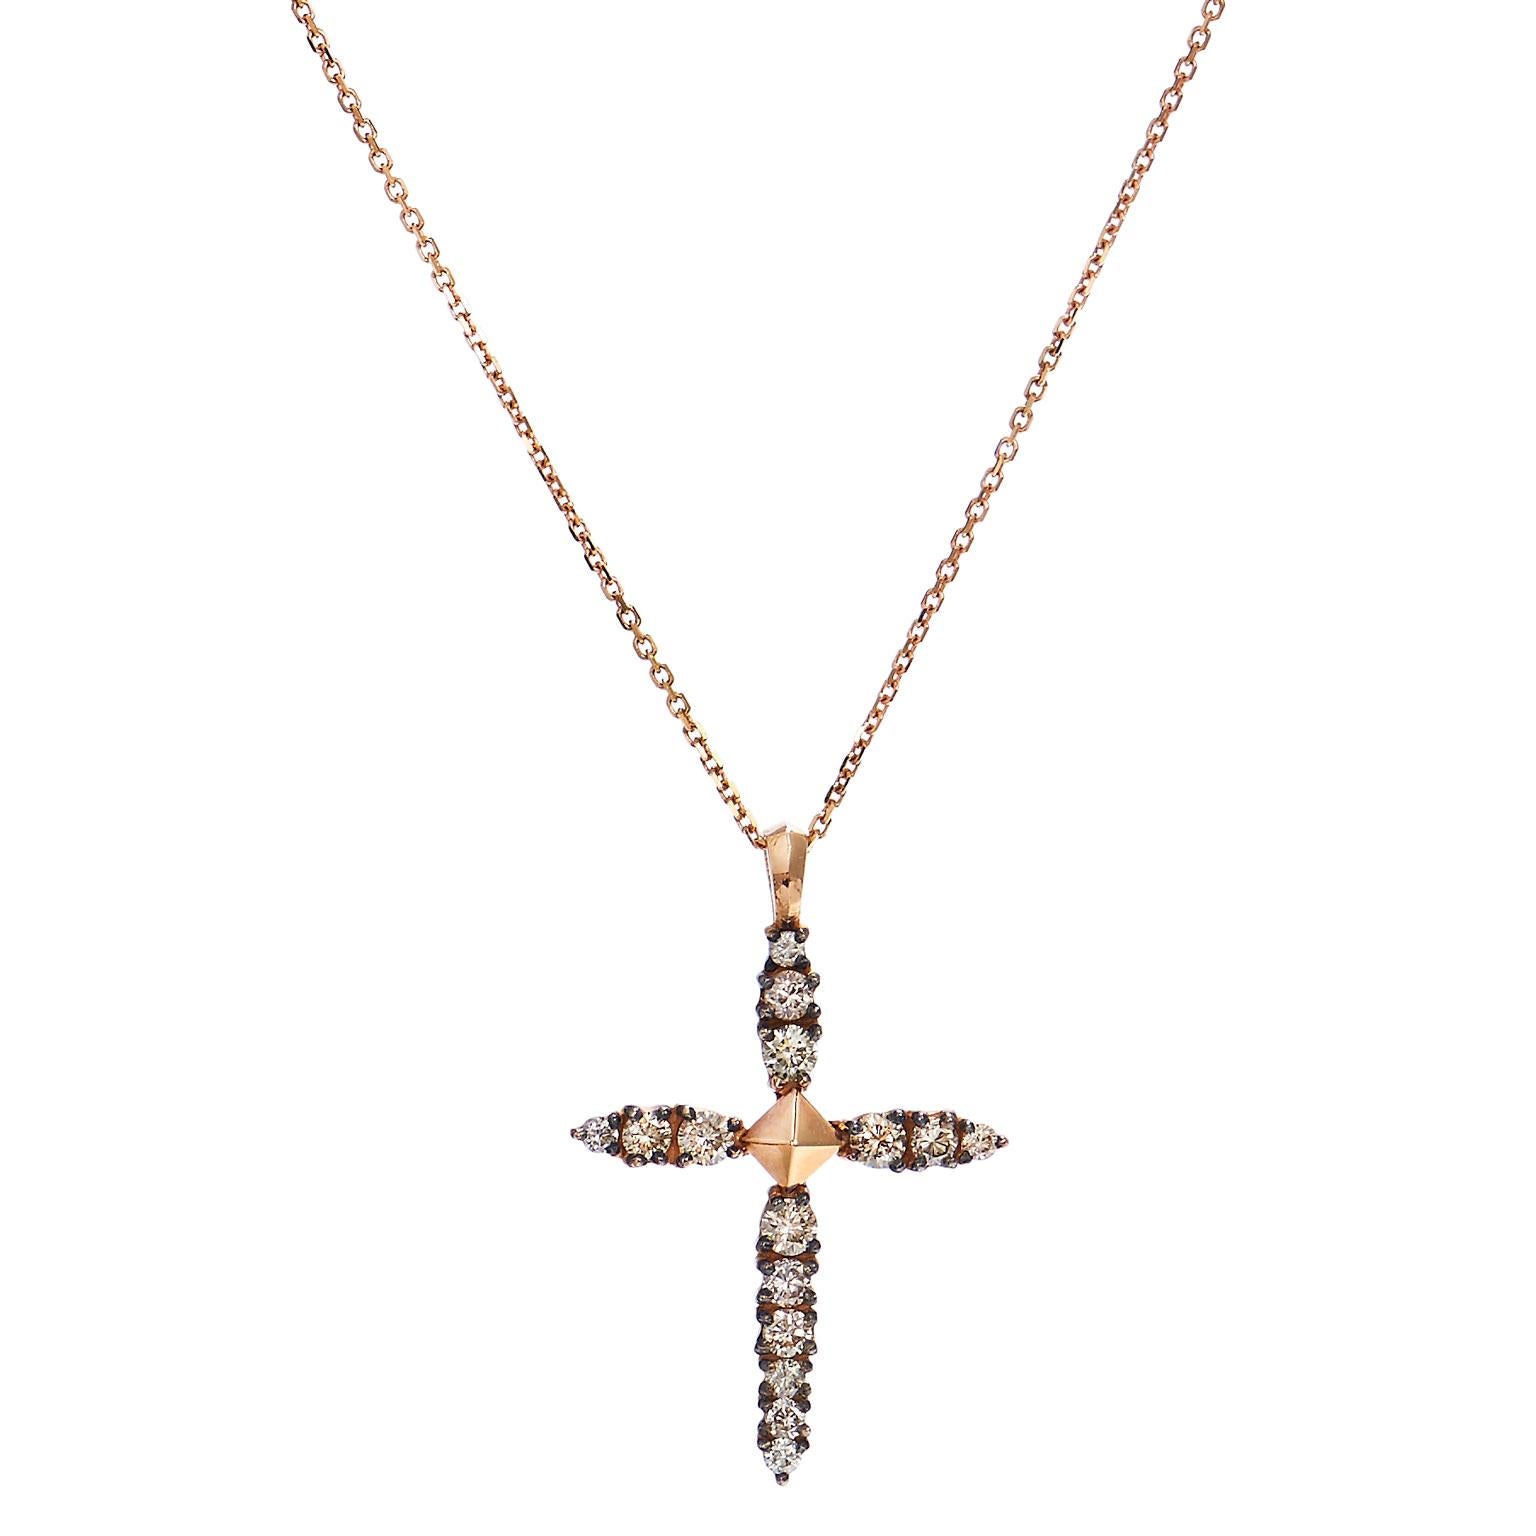 Suzanne Kalan 0.45 Carat Champagne Diamond Cross Necklace

Suzanne Kalan 18 karat rose gold cross necklace featuring 0.45 carat of champagne diamonds.
This stunning cross measures 17 x 21 mm and 17 x 25 mm with the bale on the top of the cross.